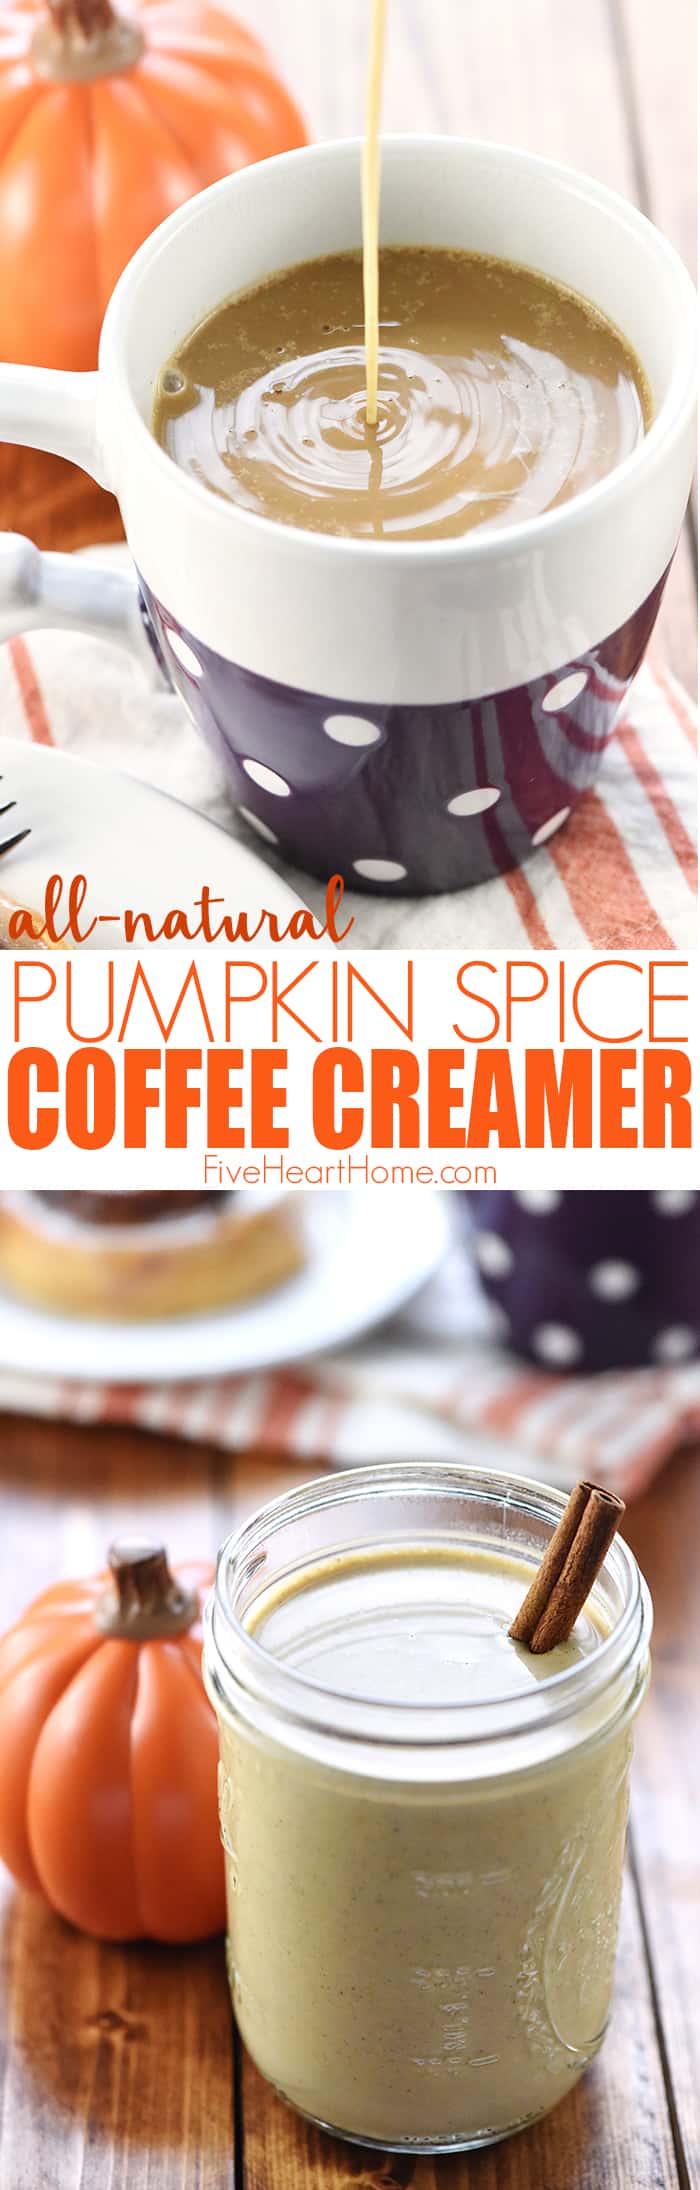 Homemade Pumpkin Spice Coffee Creamer Recipe ~ made with real pumpkin puree and warm spices for all-natural, Starbucks copycat, Pumpkin Spice Lattes at home! | FiveHeartHome.com via @fivehearthome